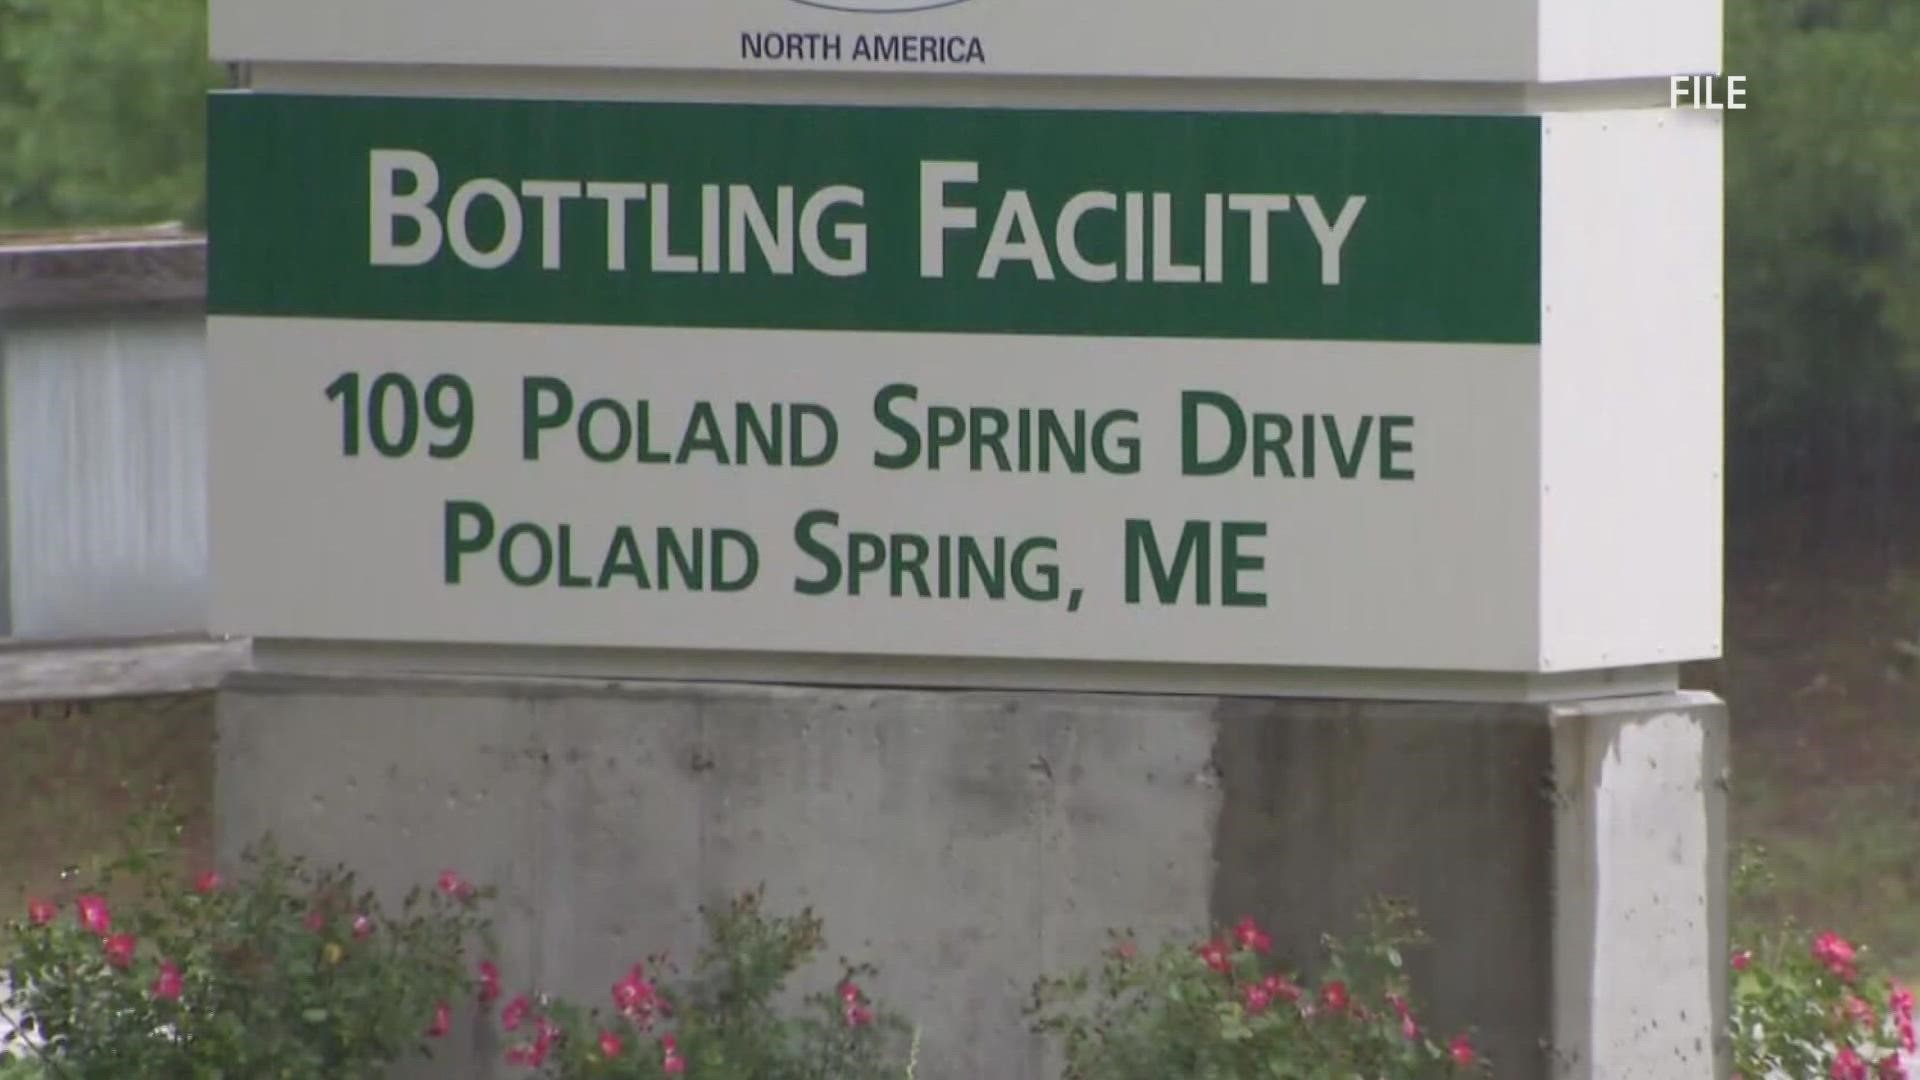 Poland Springs says doubling its output will not deplete local water sources, but some residents have expressed concerns.